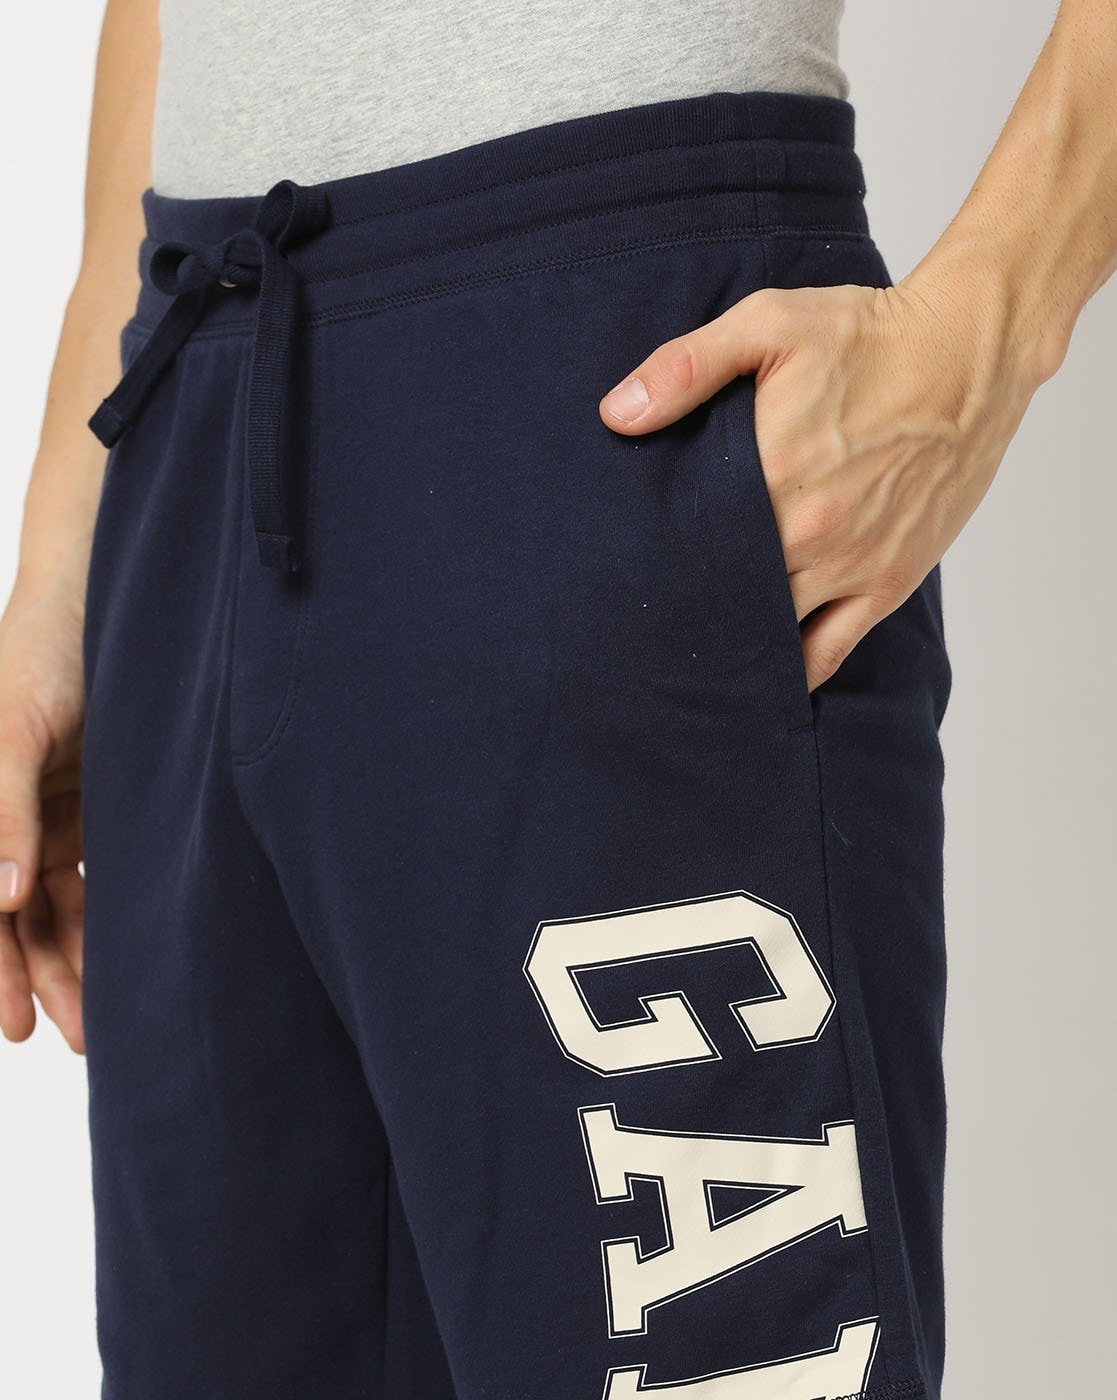 Gap Shorts – Southern Blessed Shop